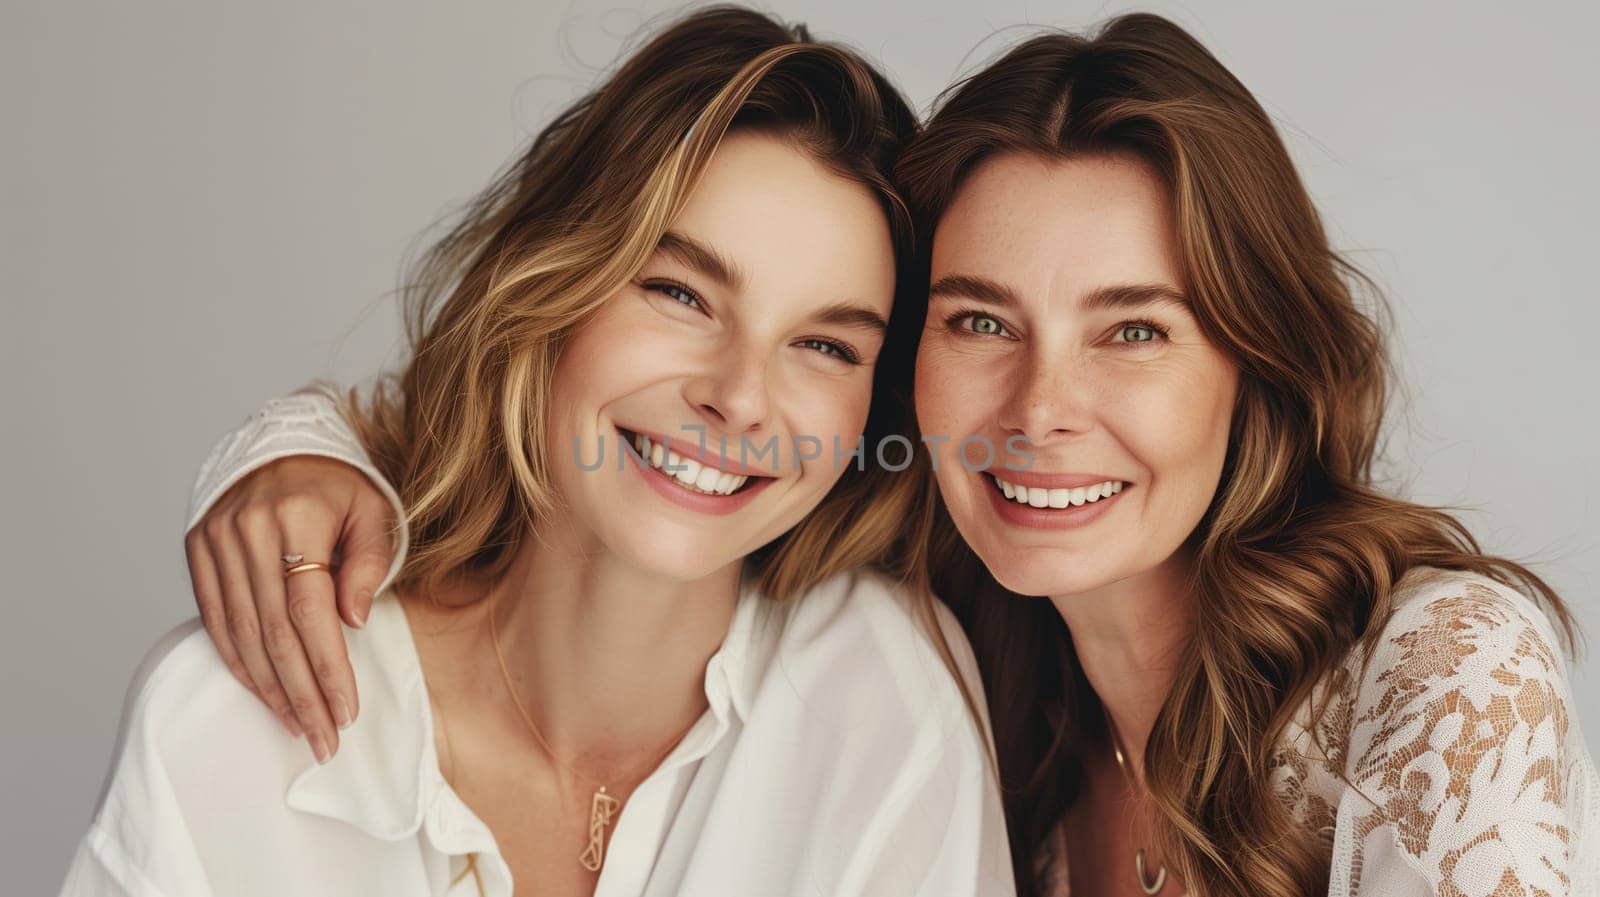 Portrait of happy smiling mature mother and adult daughter, two women together looking at camera on studio background